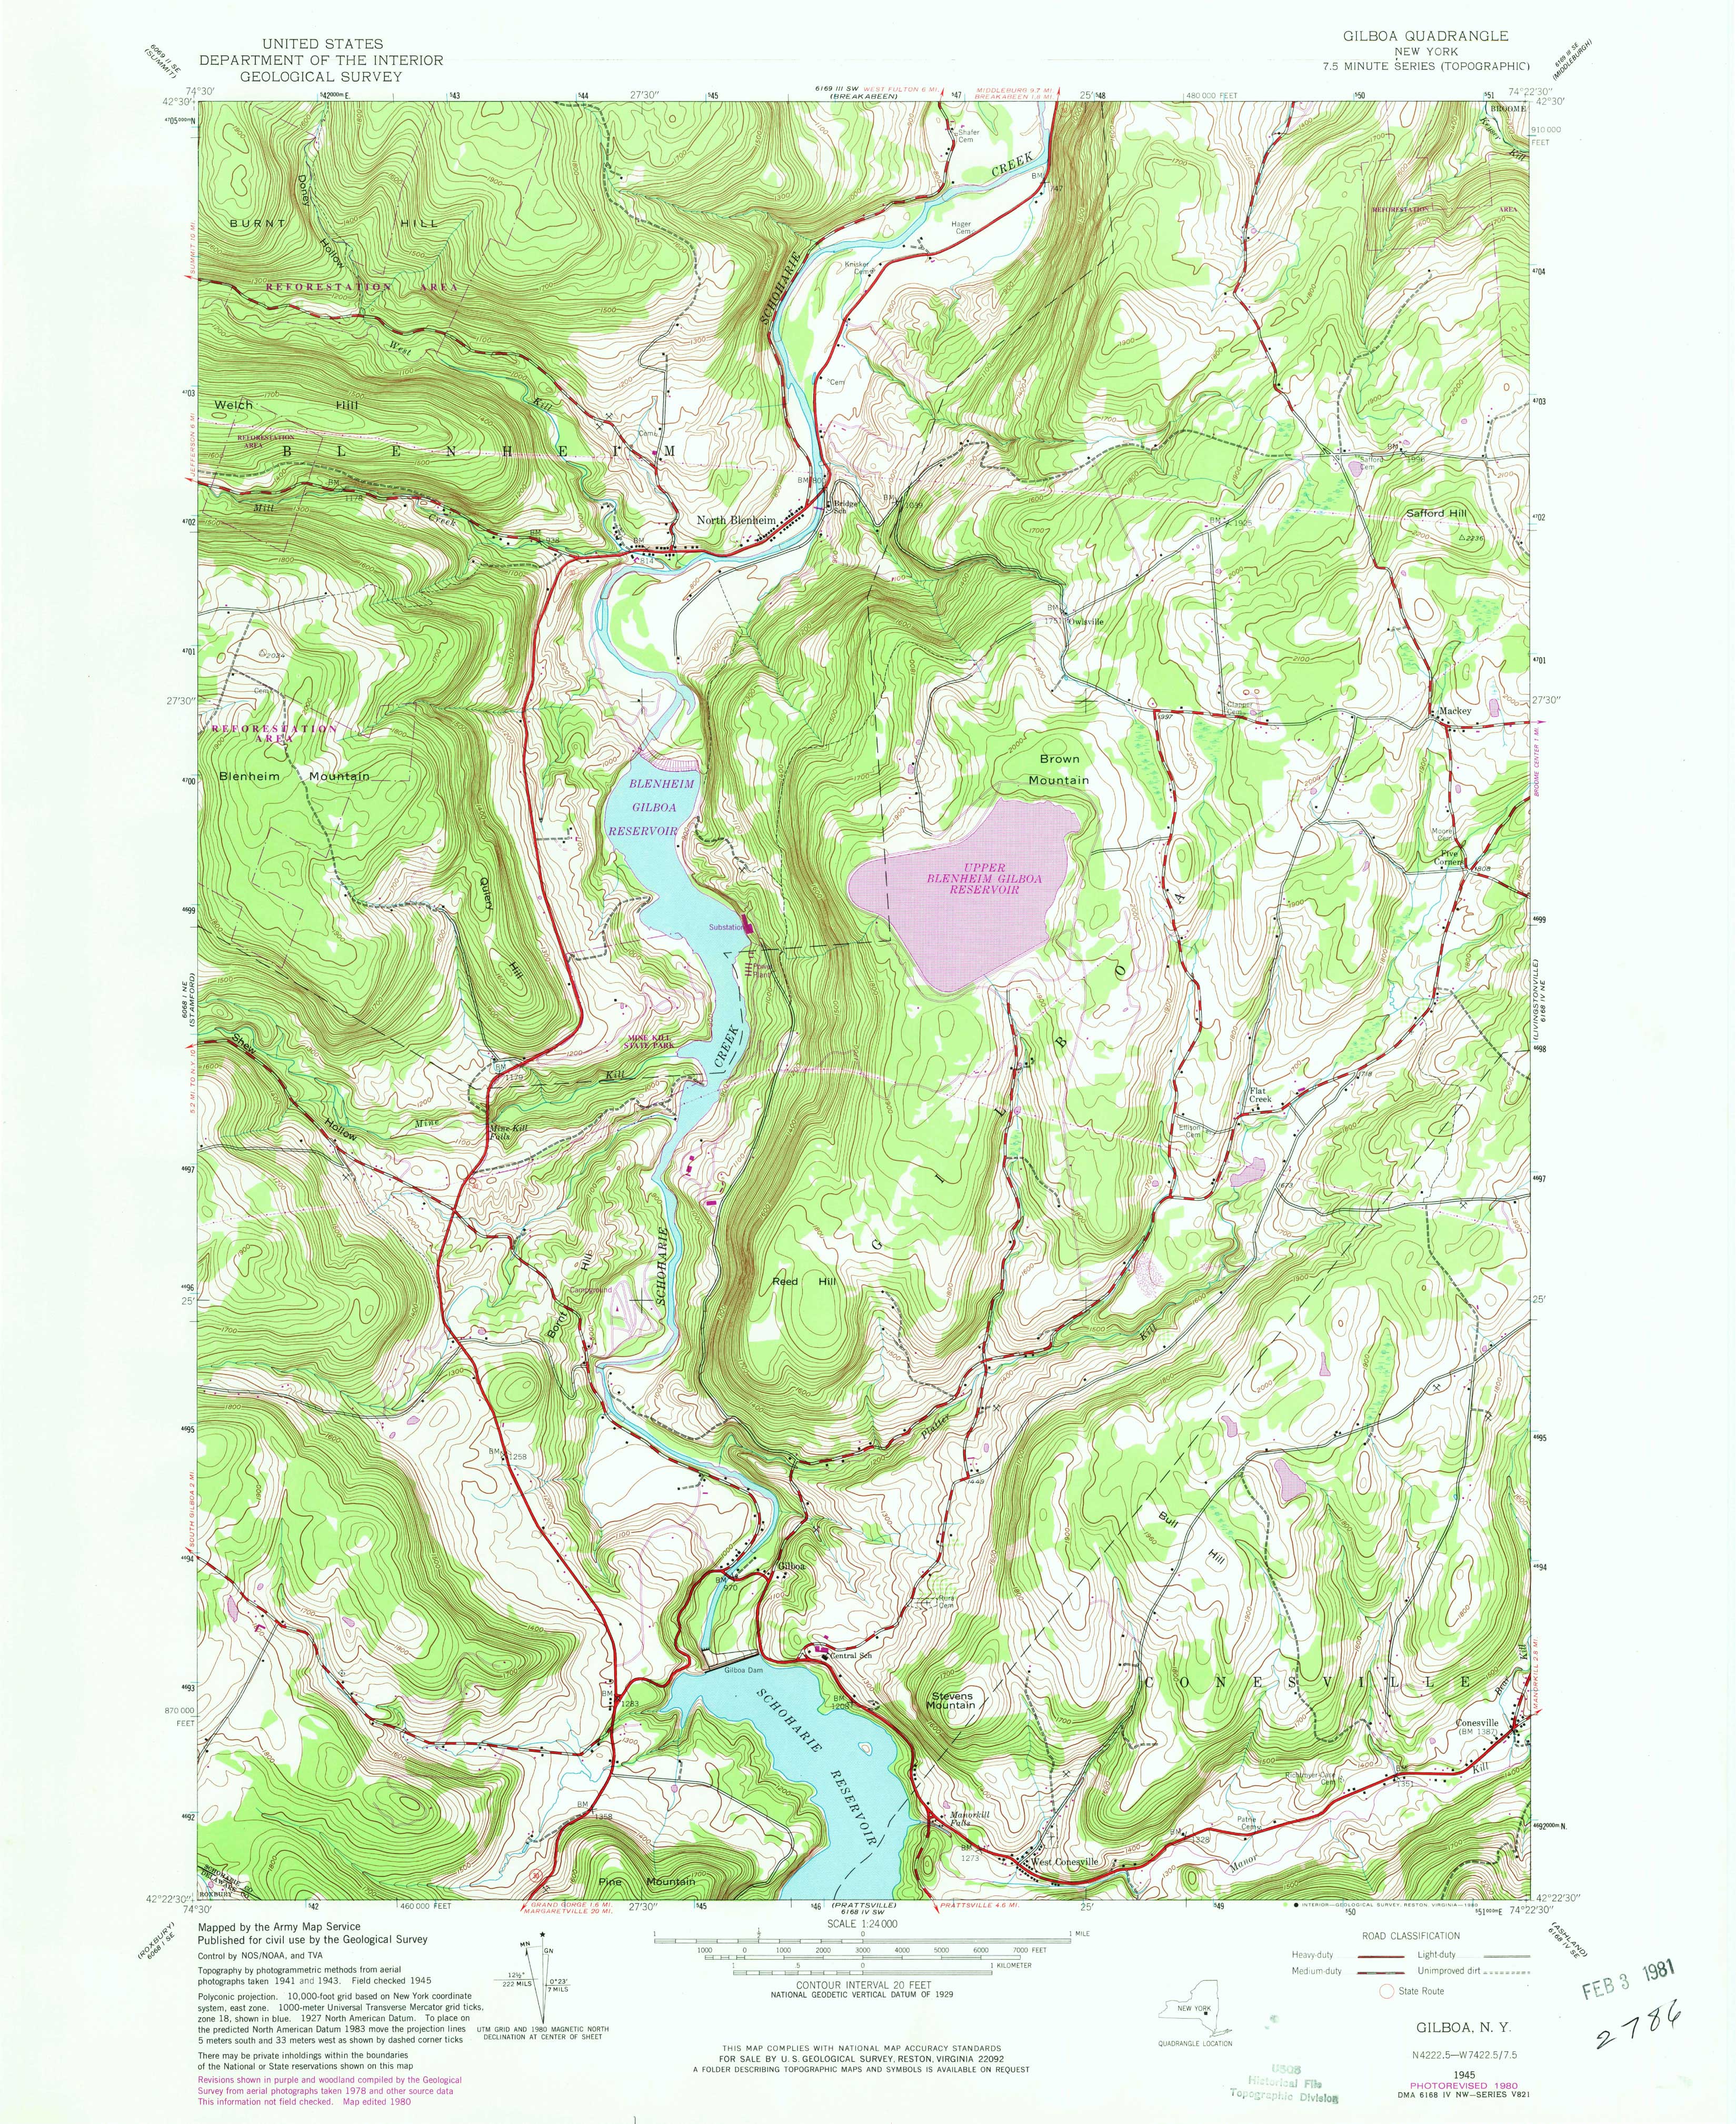 1945 USGS topographical map of Gilboa